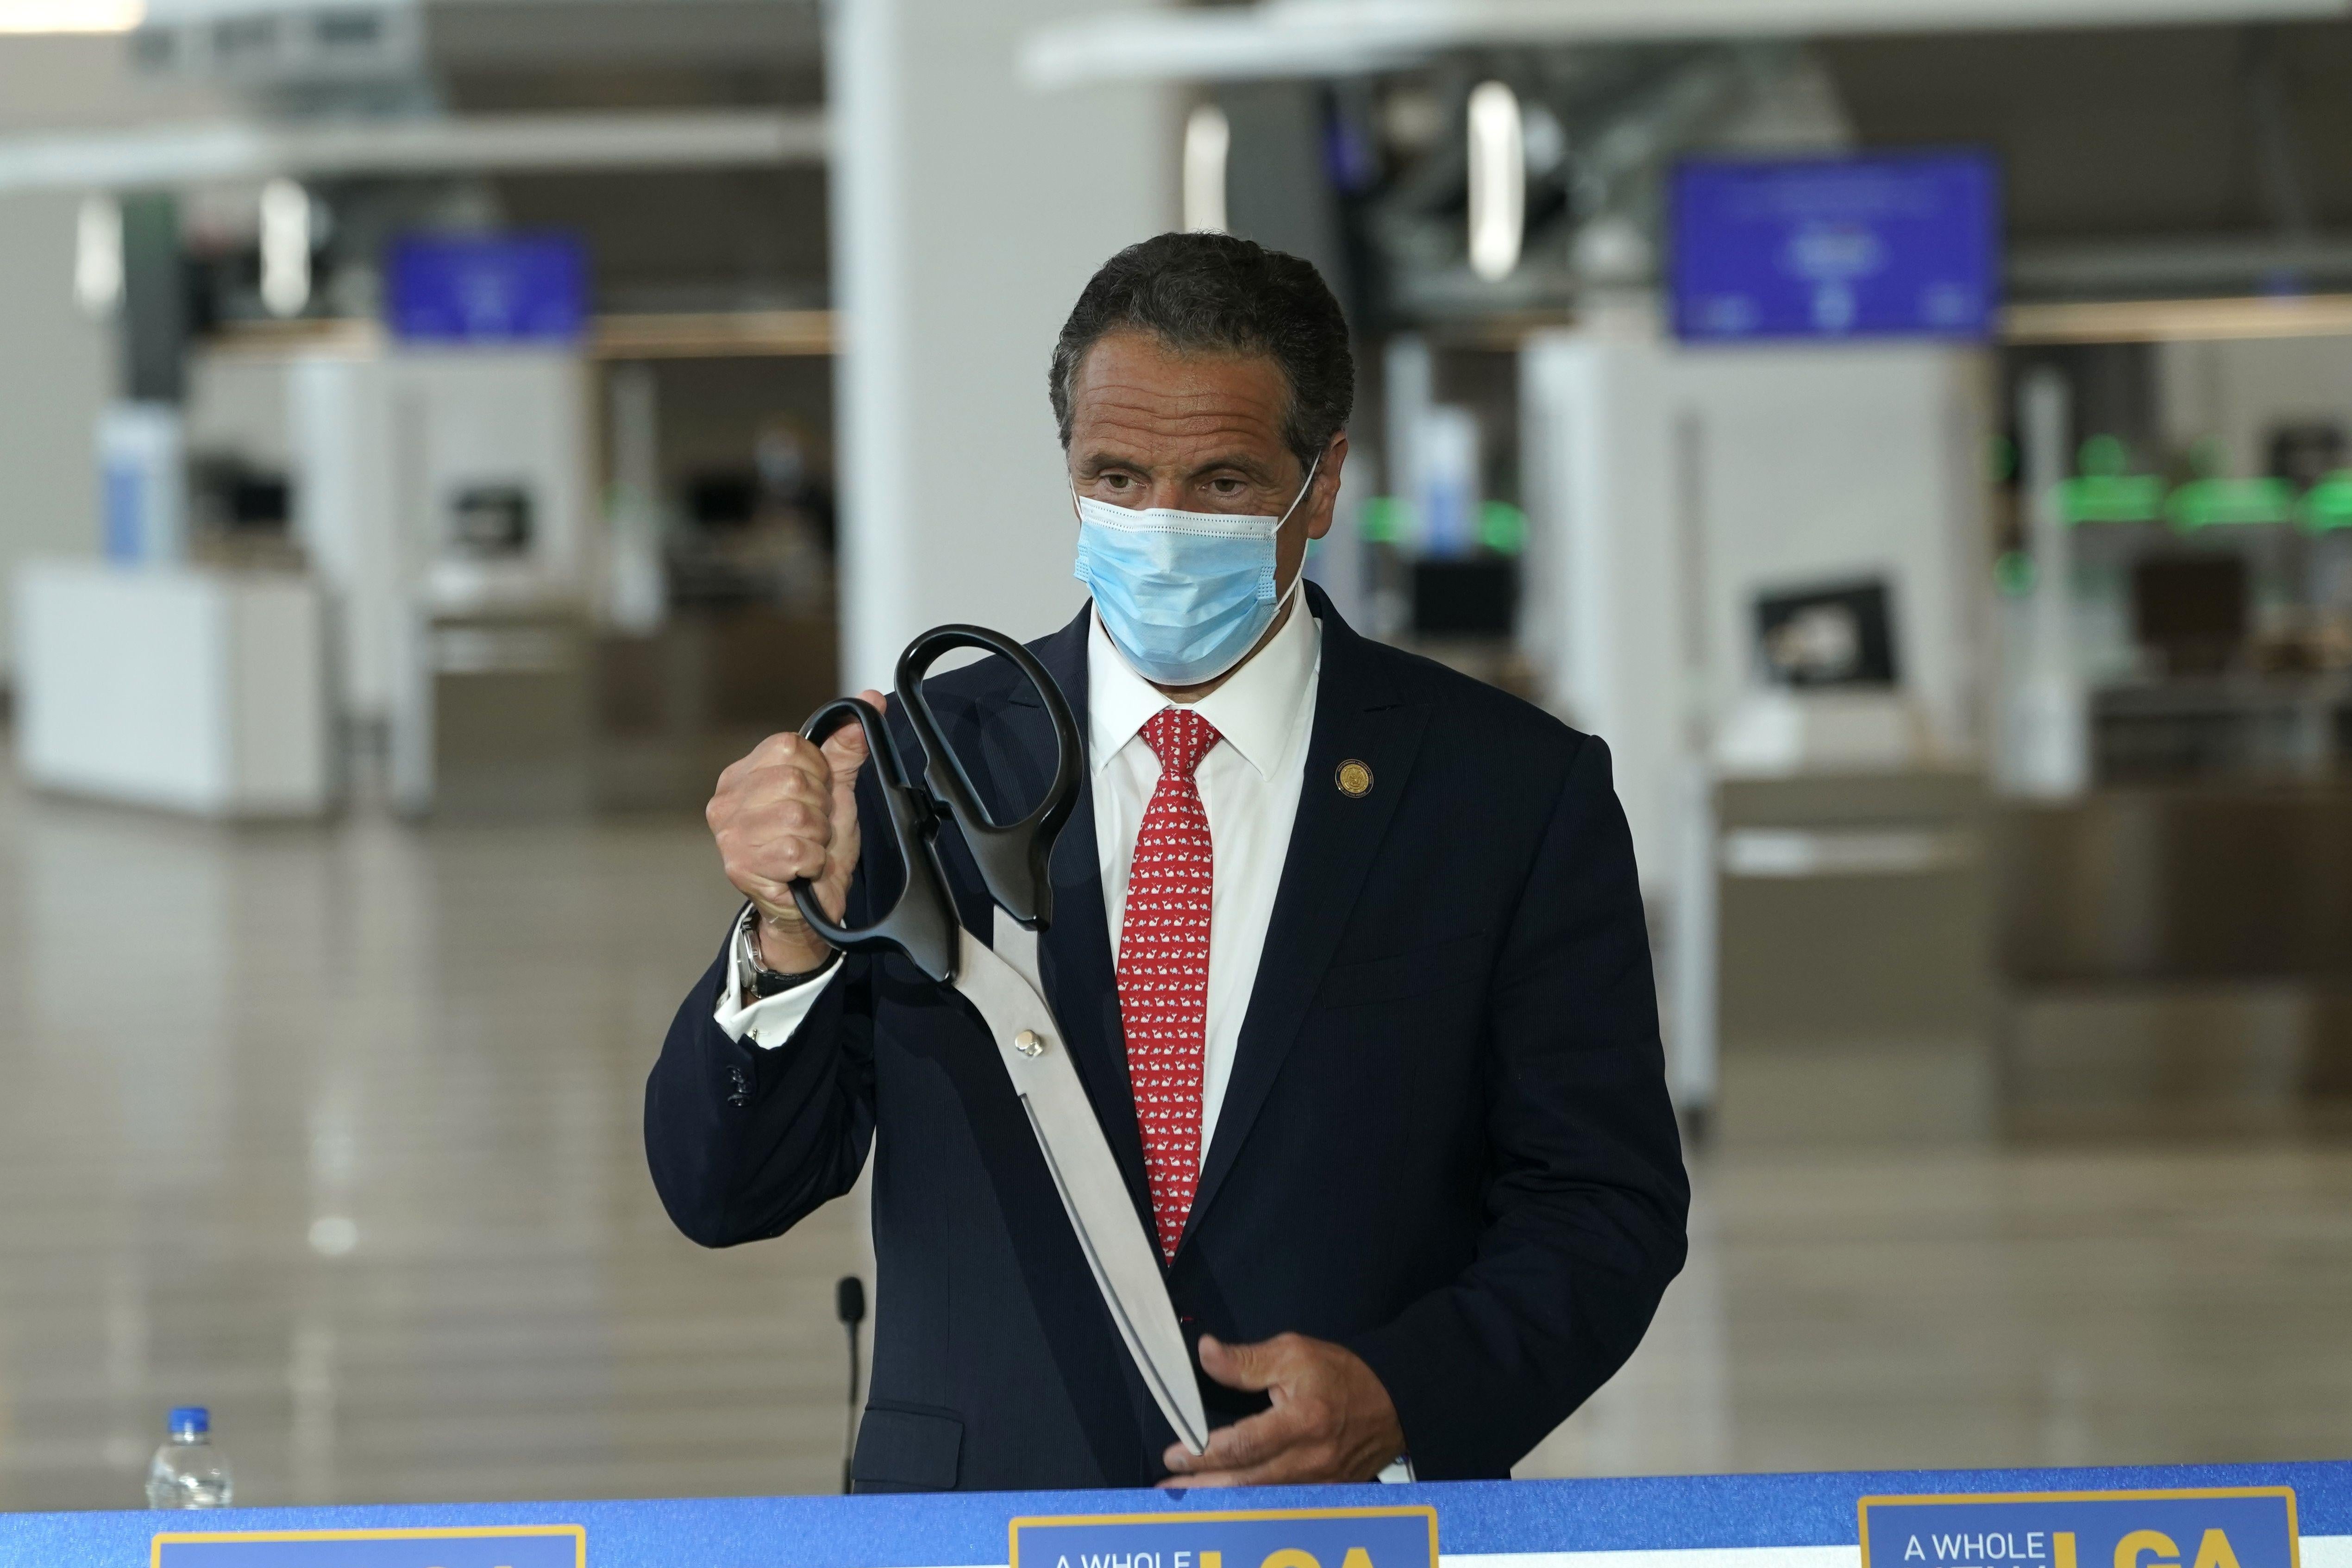 Cuomo wearing a surgical mask and holding a giant pair of scissors as he stands next to a ribbon in the terminal.